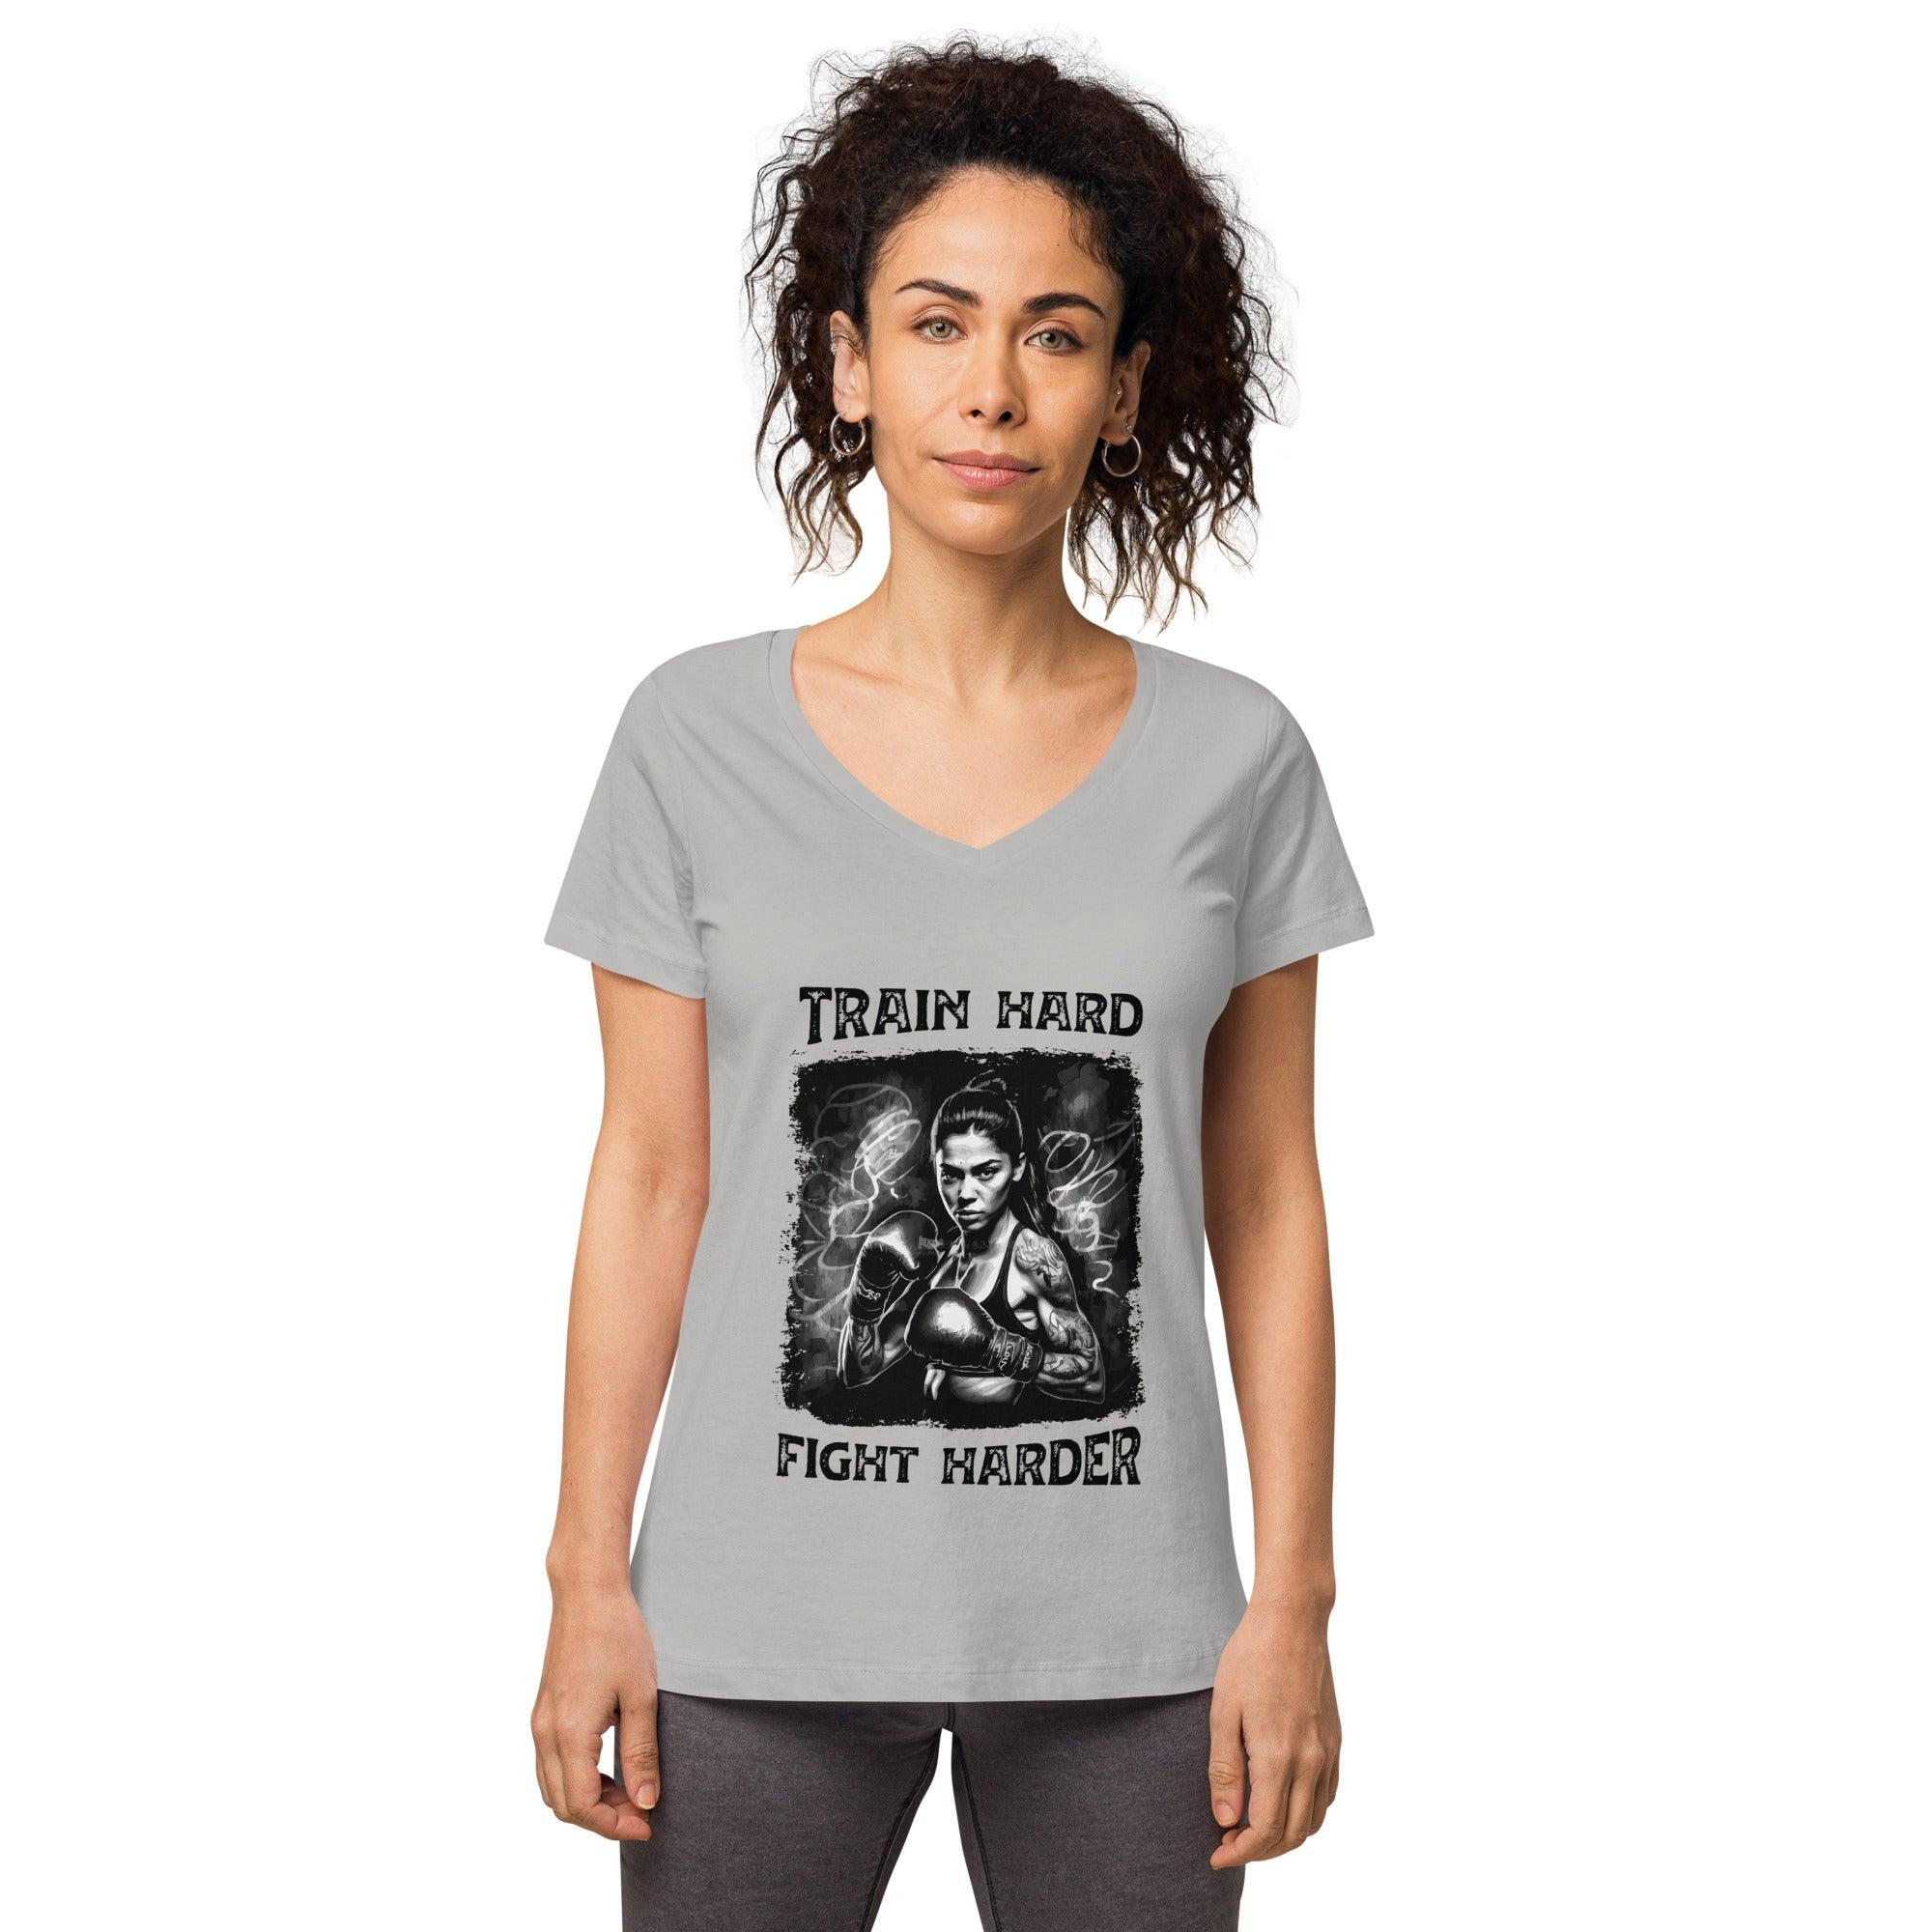 Train Hard Fight Harder Women’s Fitted V-neck T-shirt - Beyond T-shirts